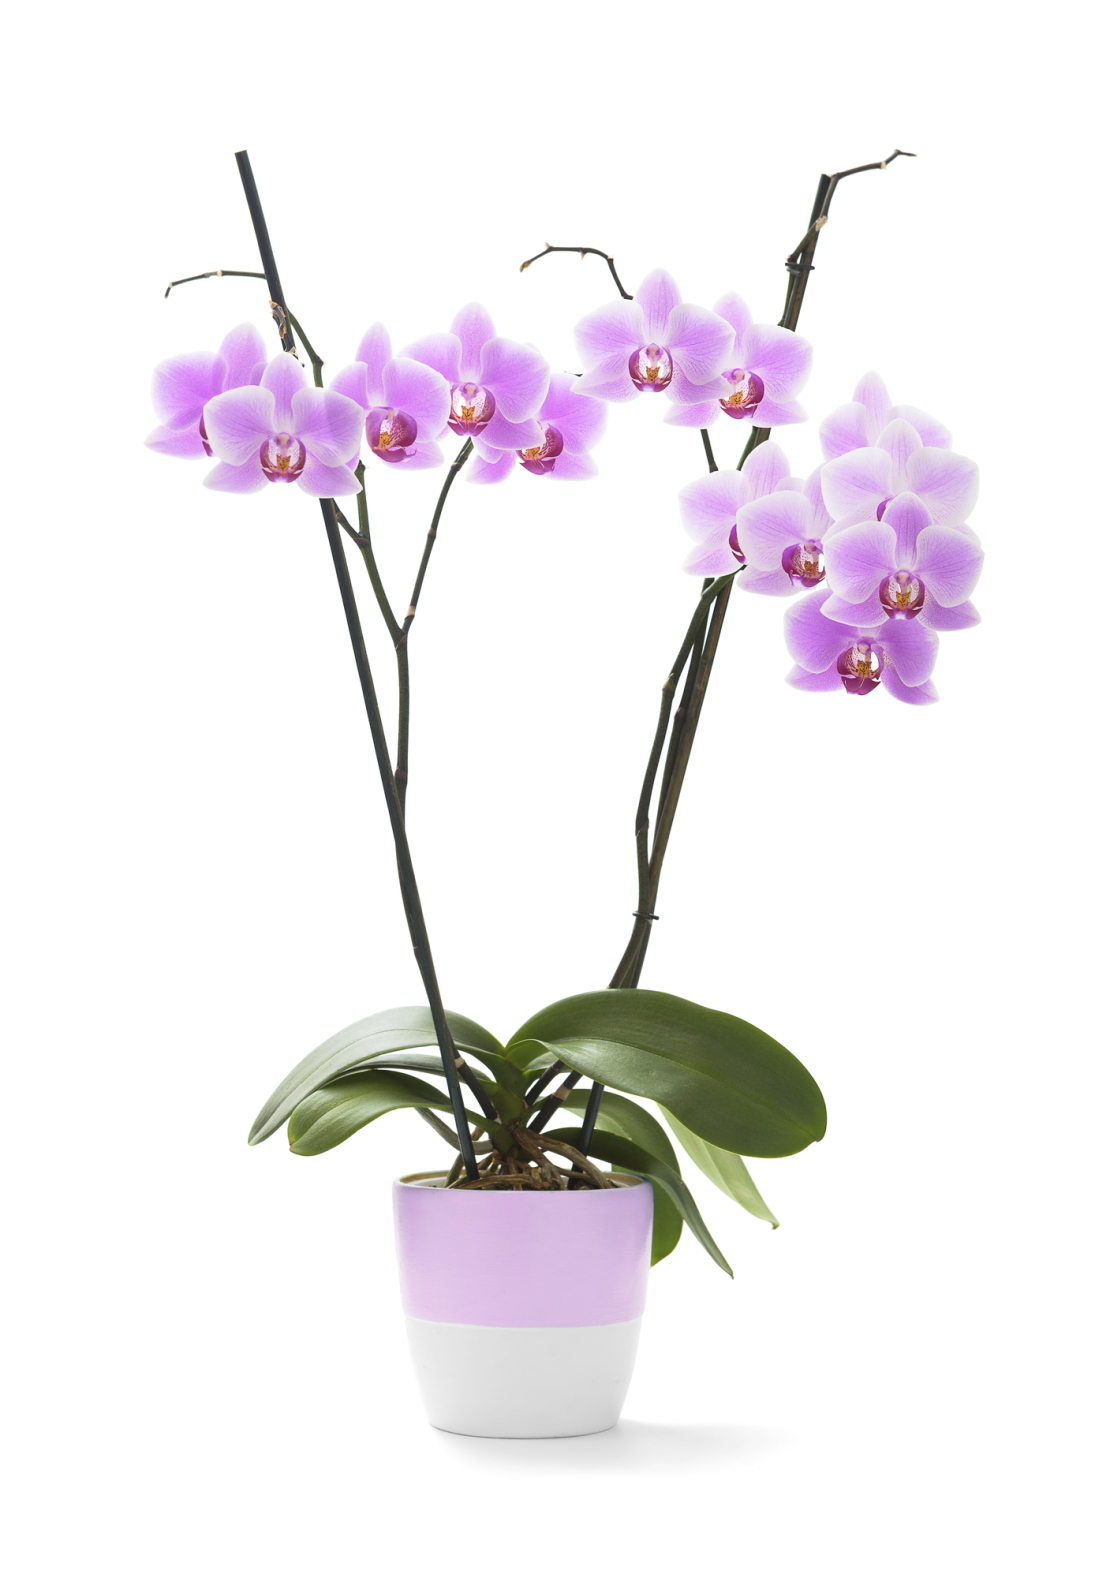 Striped Orchid with Two Branches